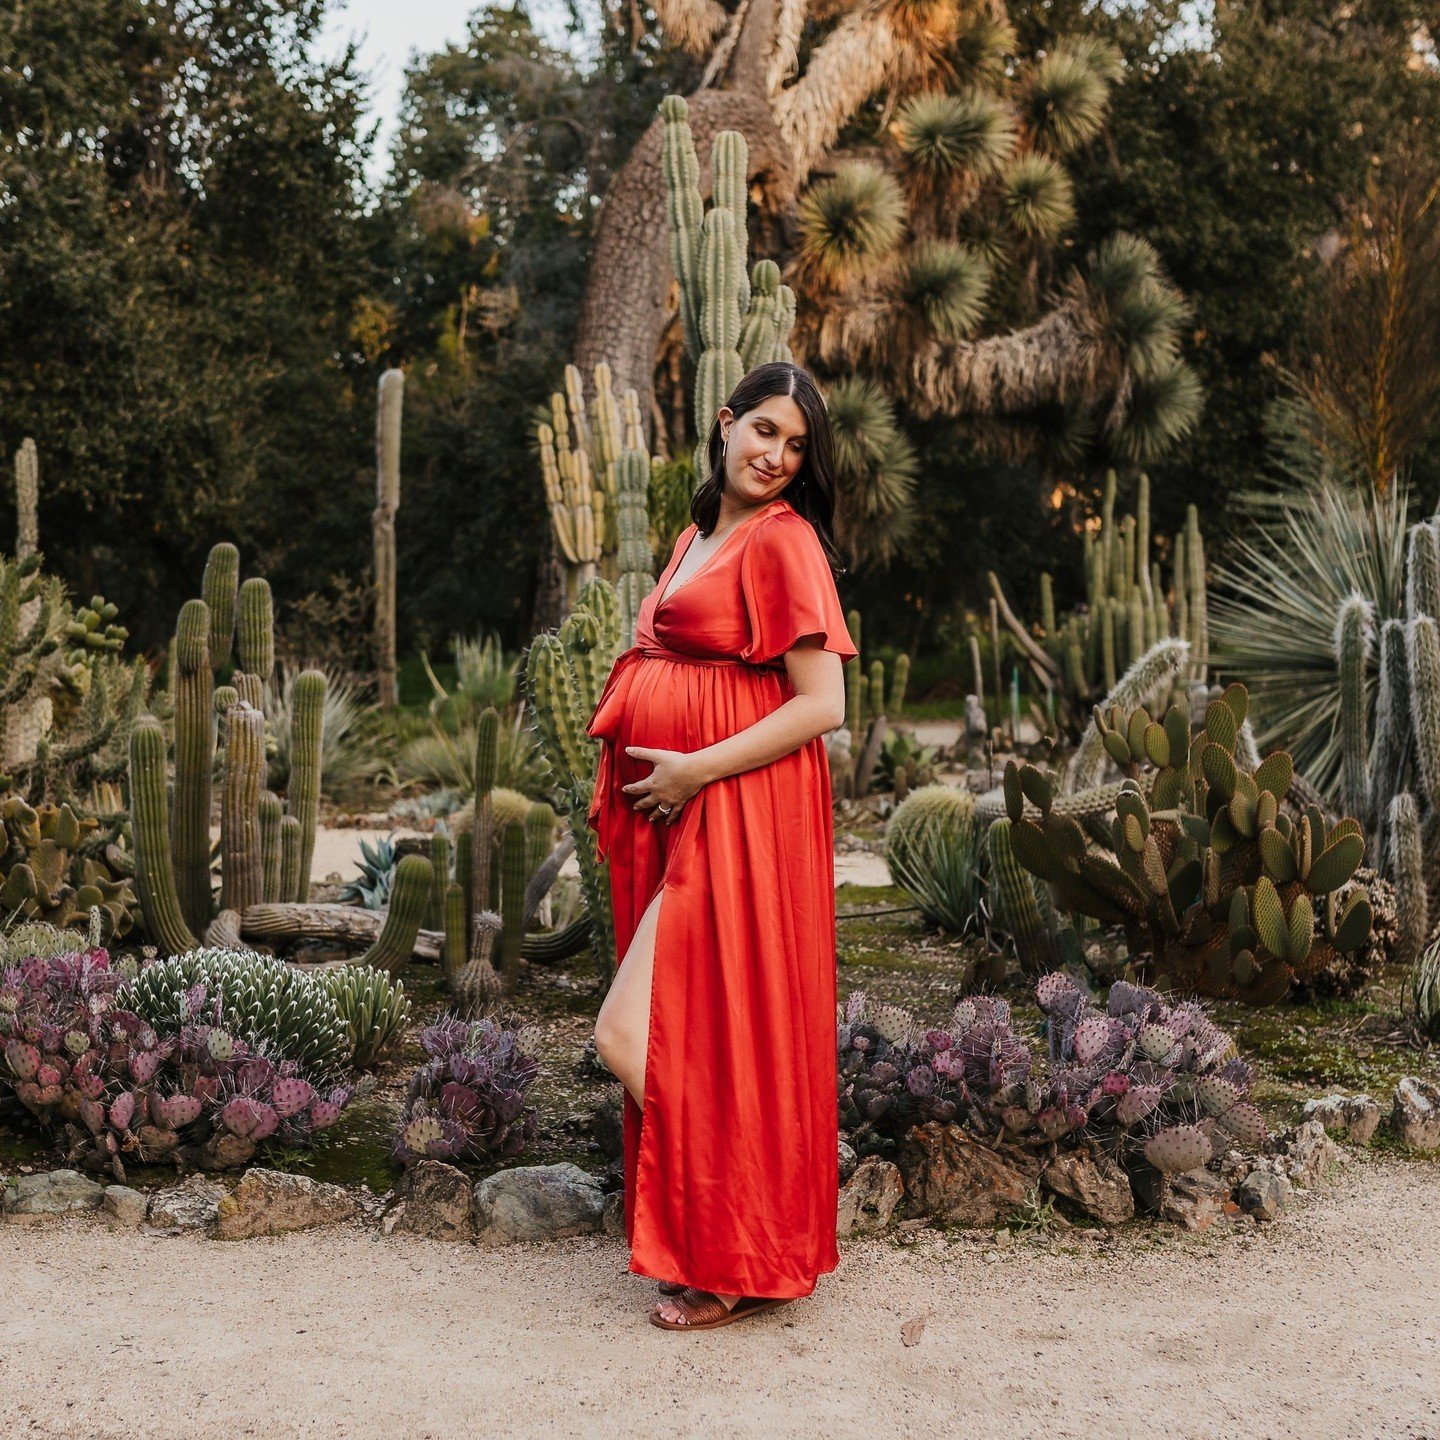 Maternity sessions are about capturing the real, raw, and unfiltered beauty of pregnancy. It's about celebrating the journey, the love, and the anticipation of what's to come. Let's capture those candid moments that tell your unique story, preserving